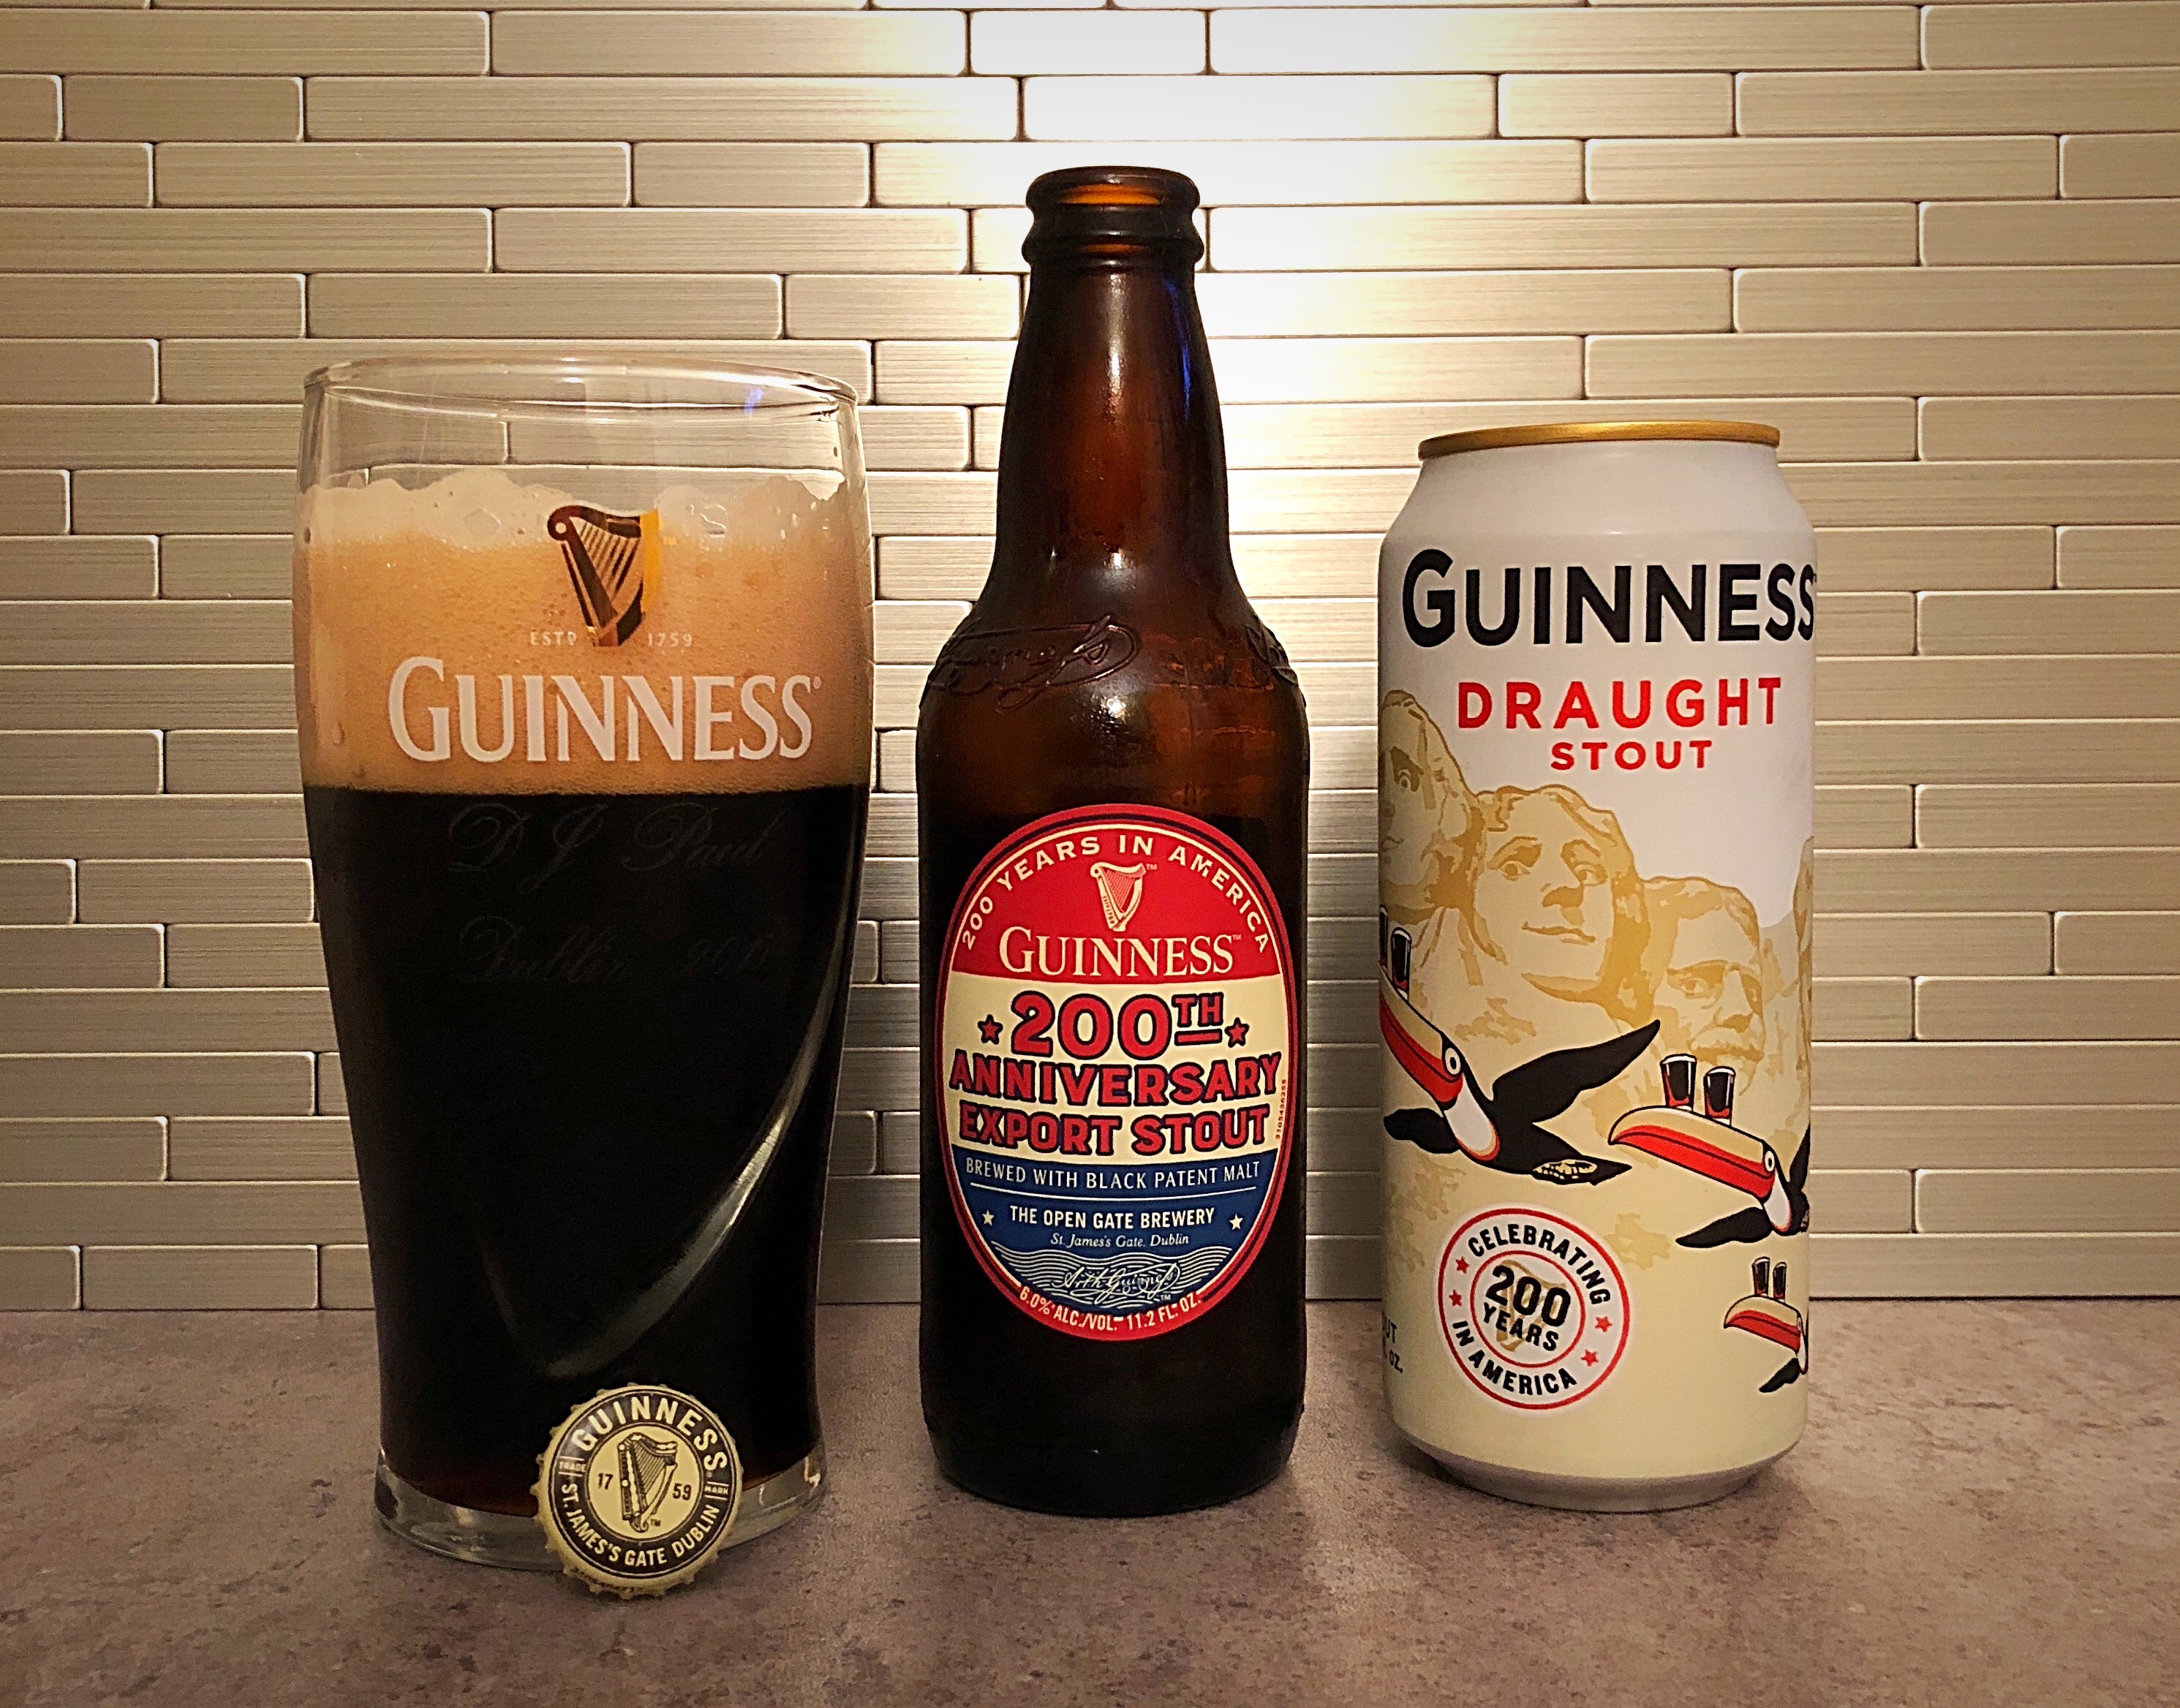 Guinness-200th-Anniversary-Export-Stout-alongside-a-can-of-its-Guinness-Stout-in-can-that-honors-200-years-of-Guinness-in-the-United-States..jpg